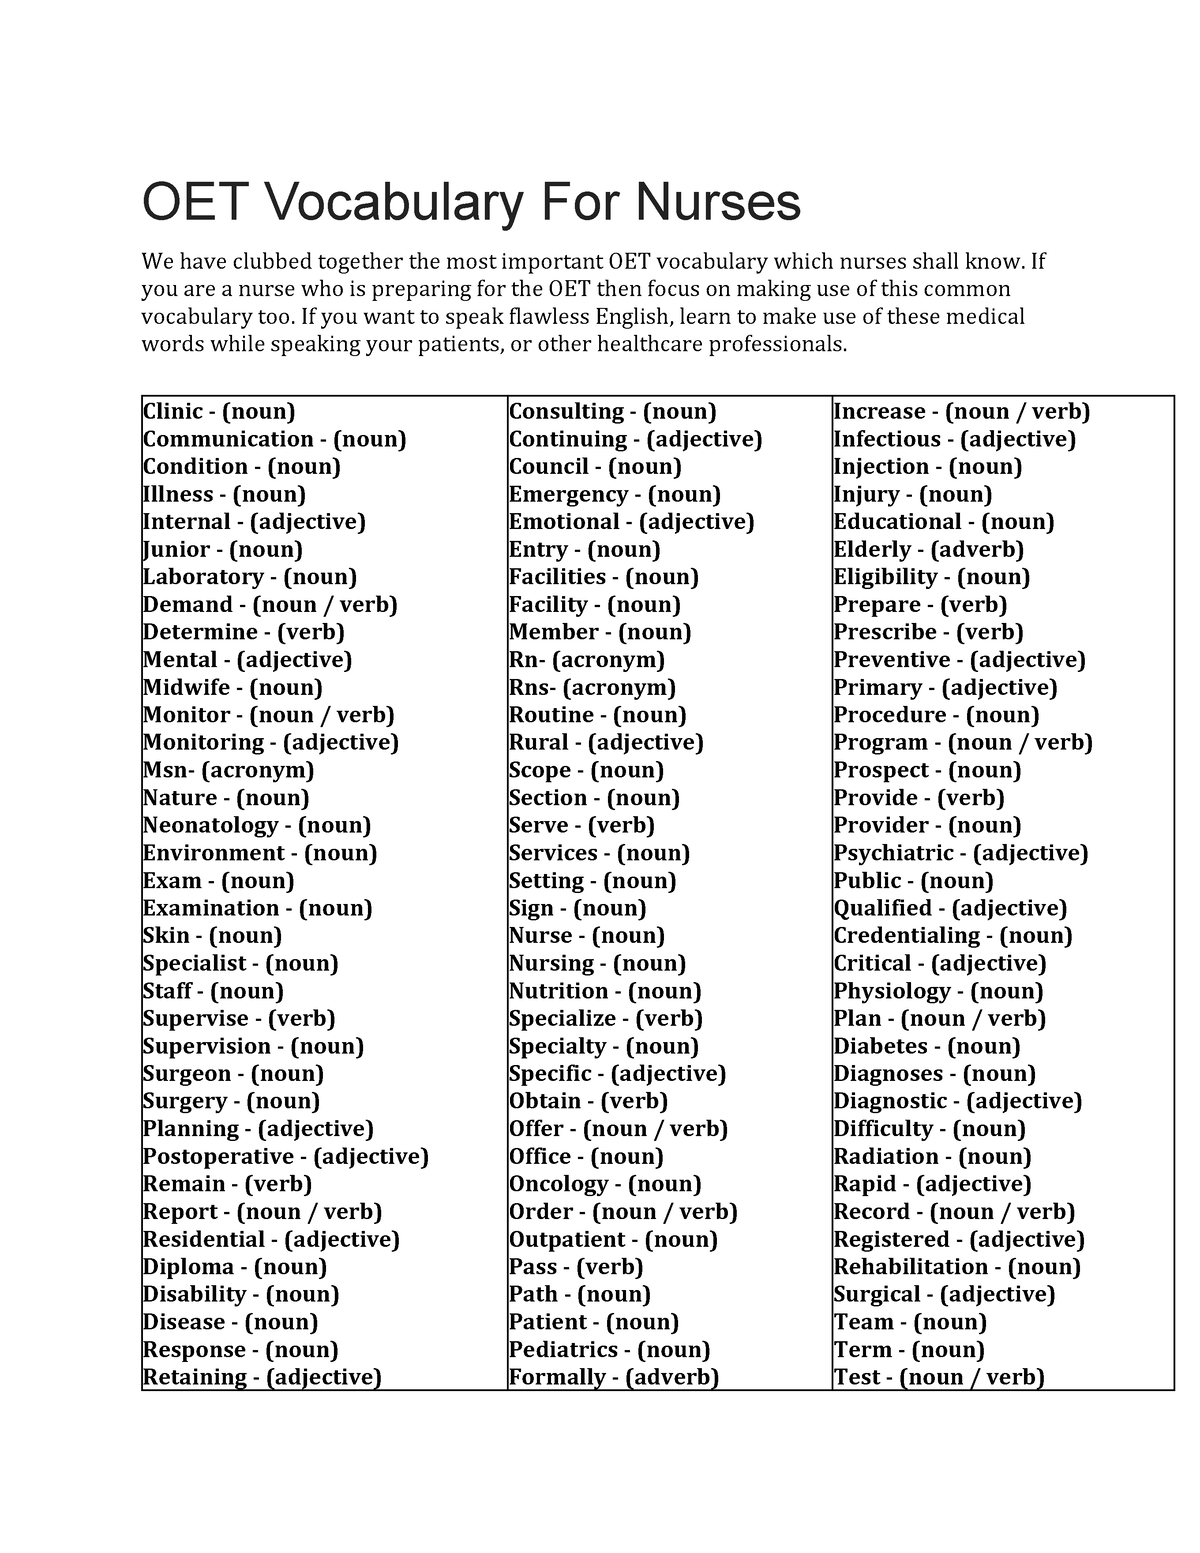 OET Vocabulary For Nurses - If you are a nurse who is preparing ...